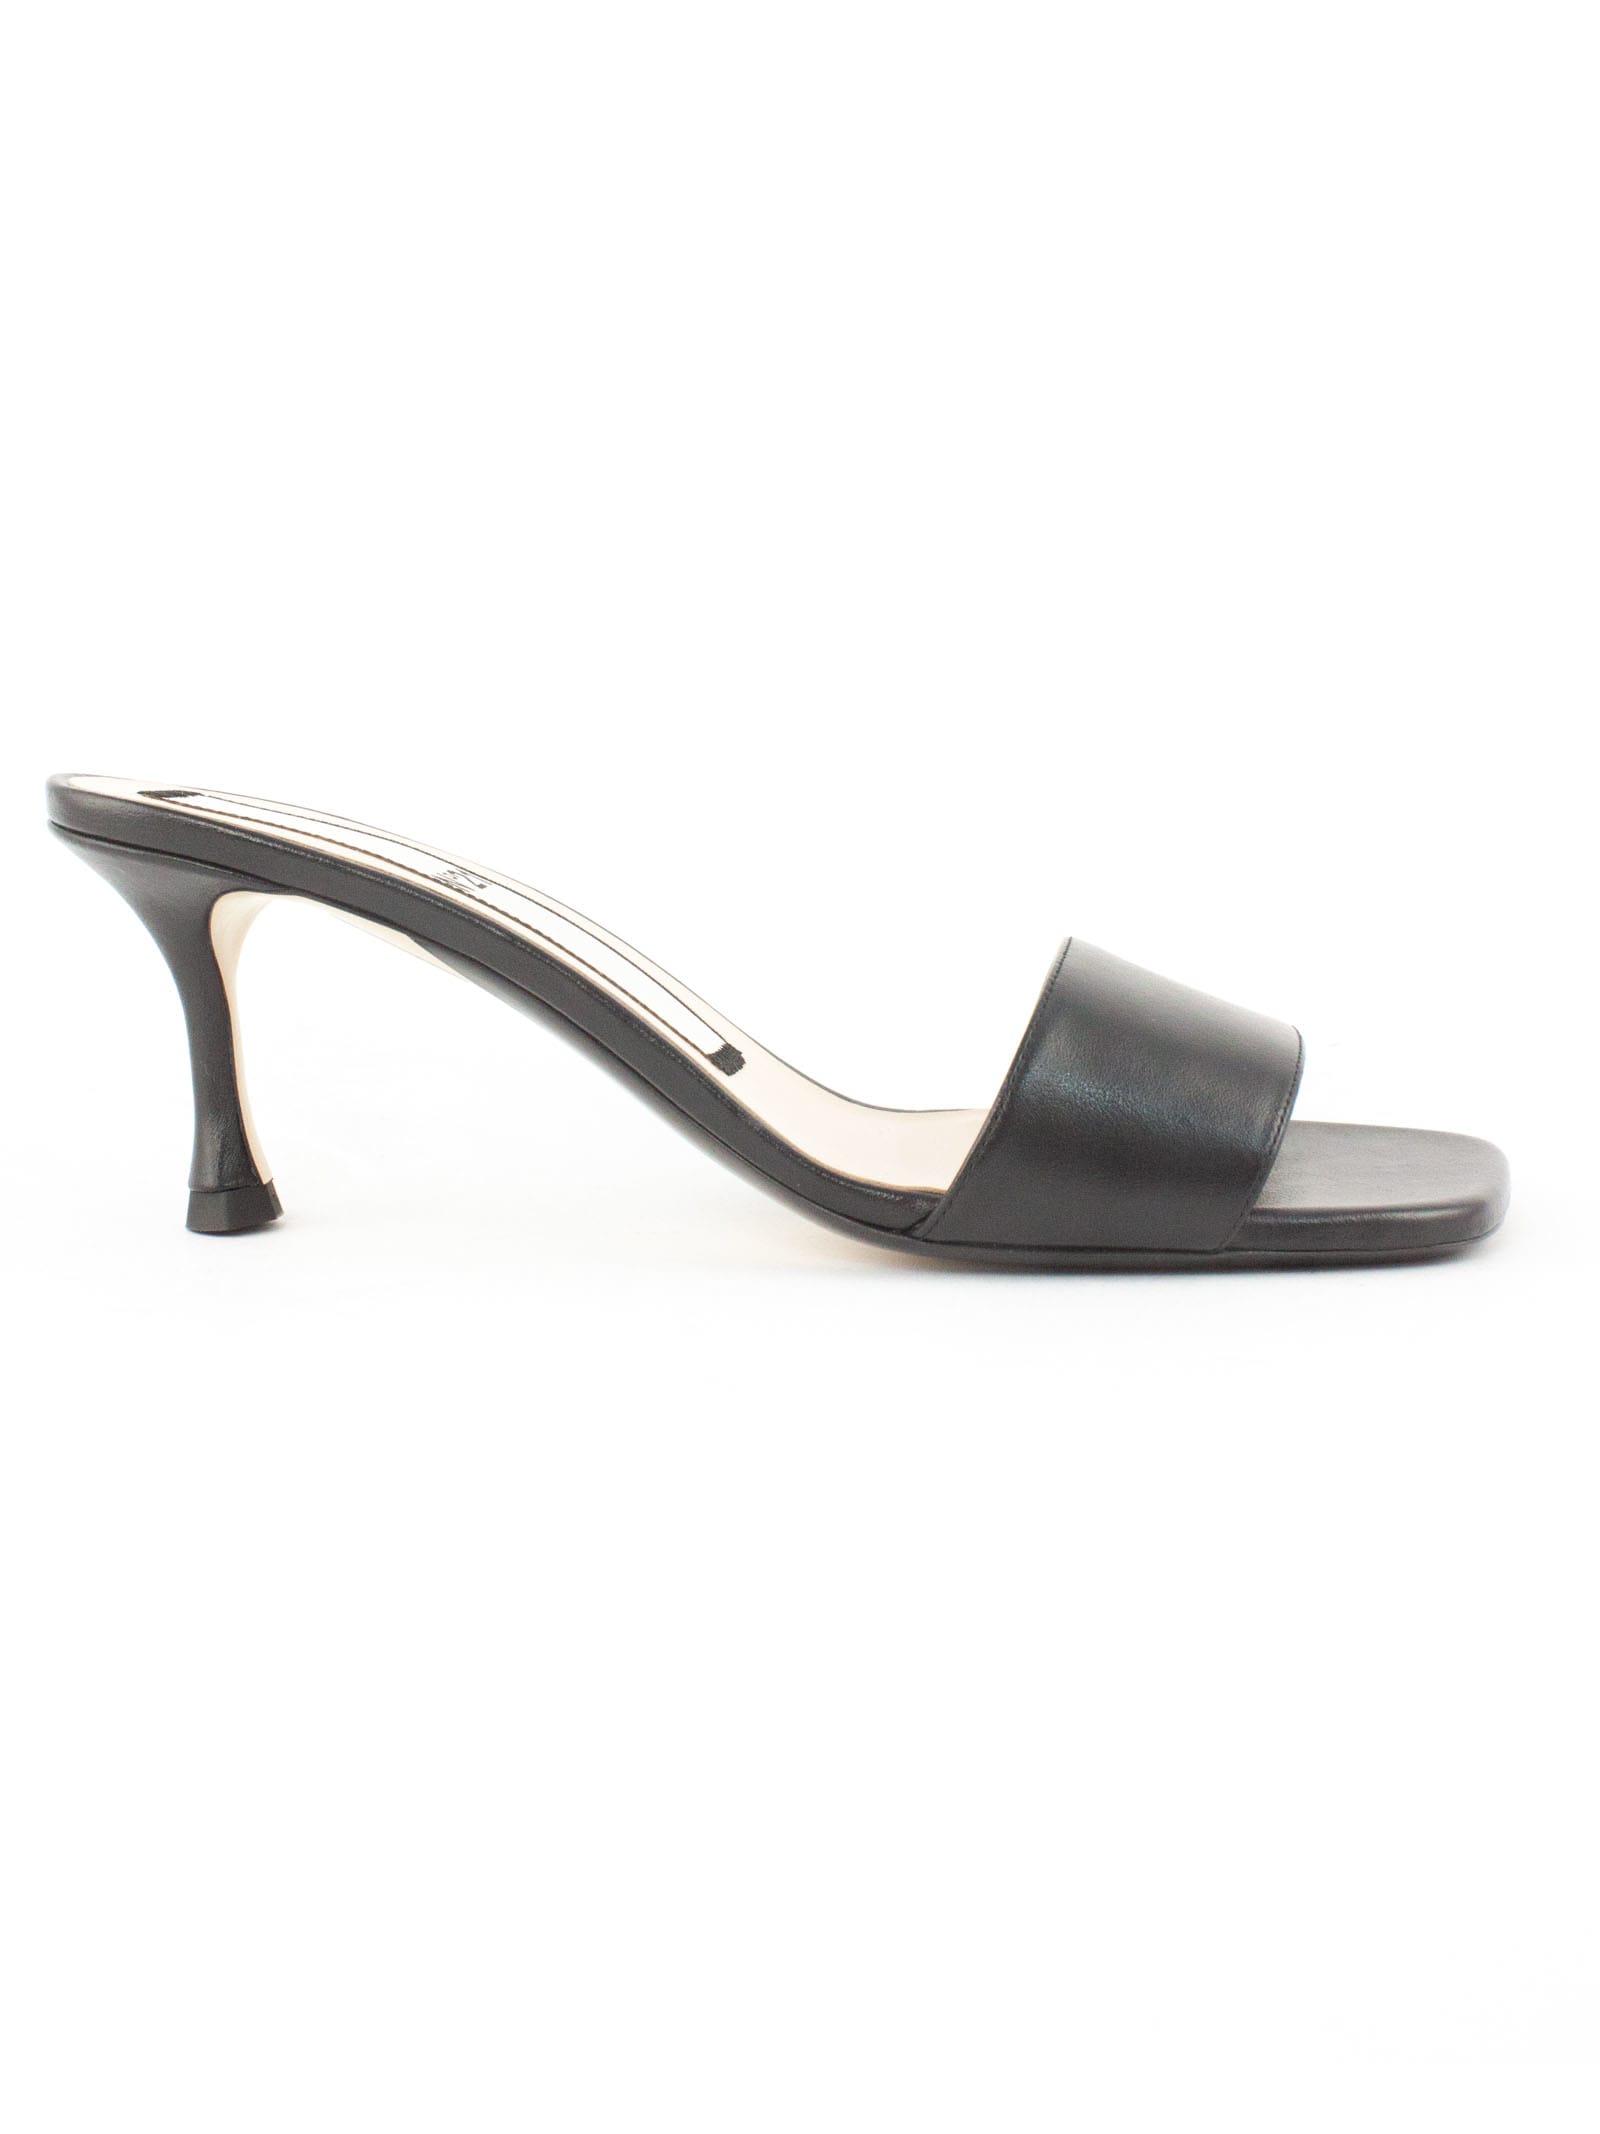 Buy N.21 Black Leather Mules online, shop N.21 shoes with free shipping